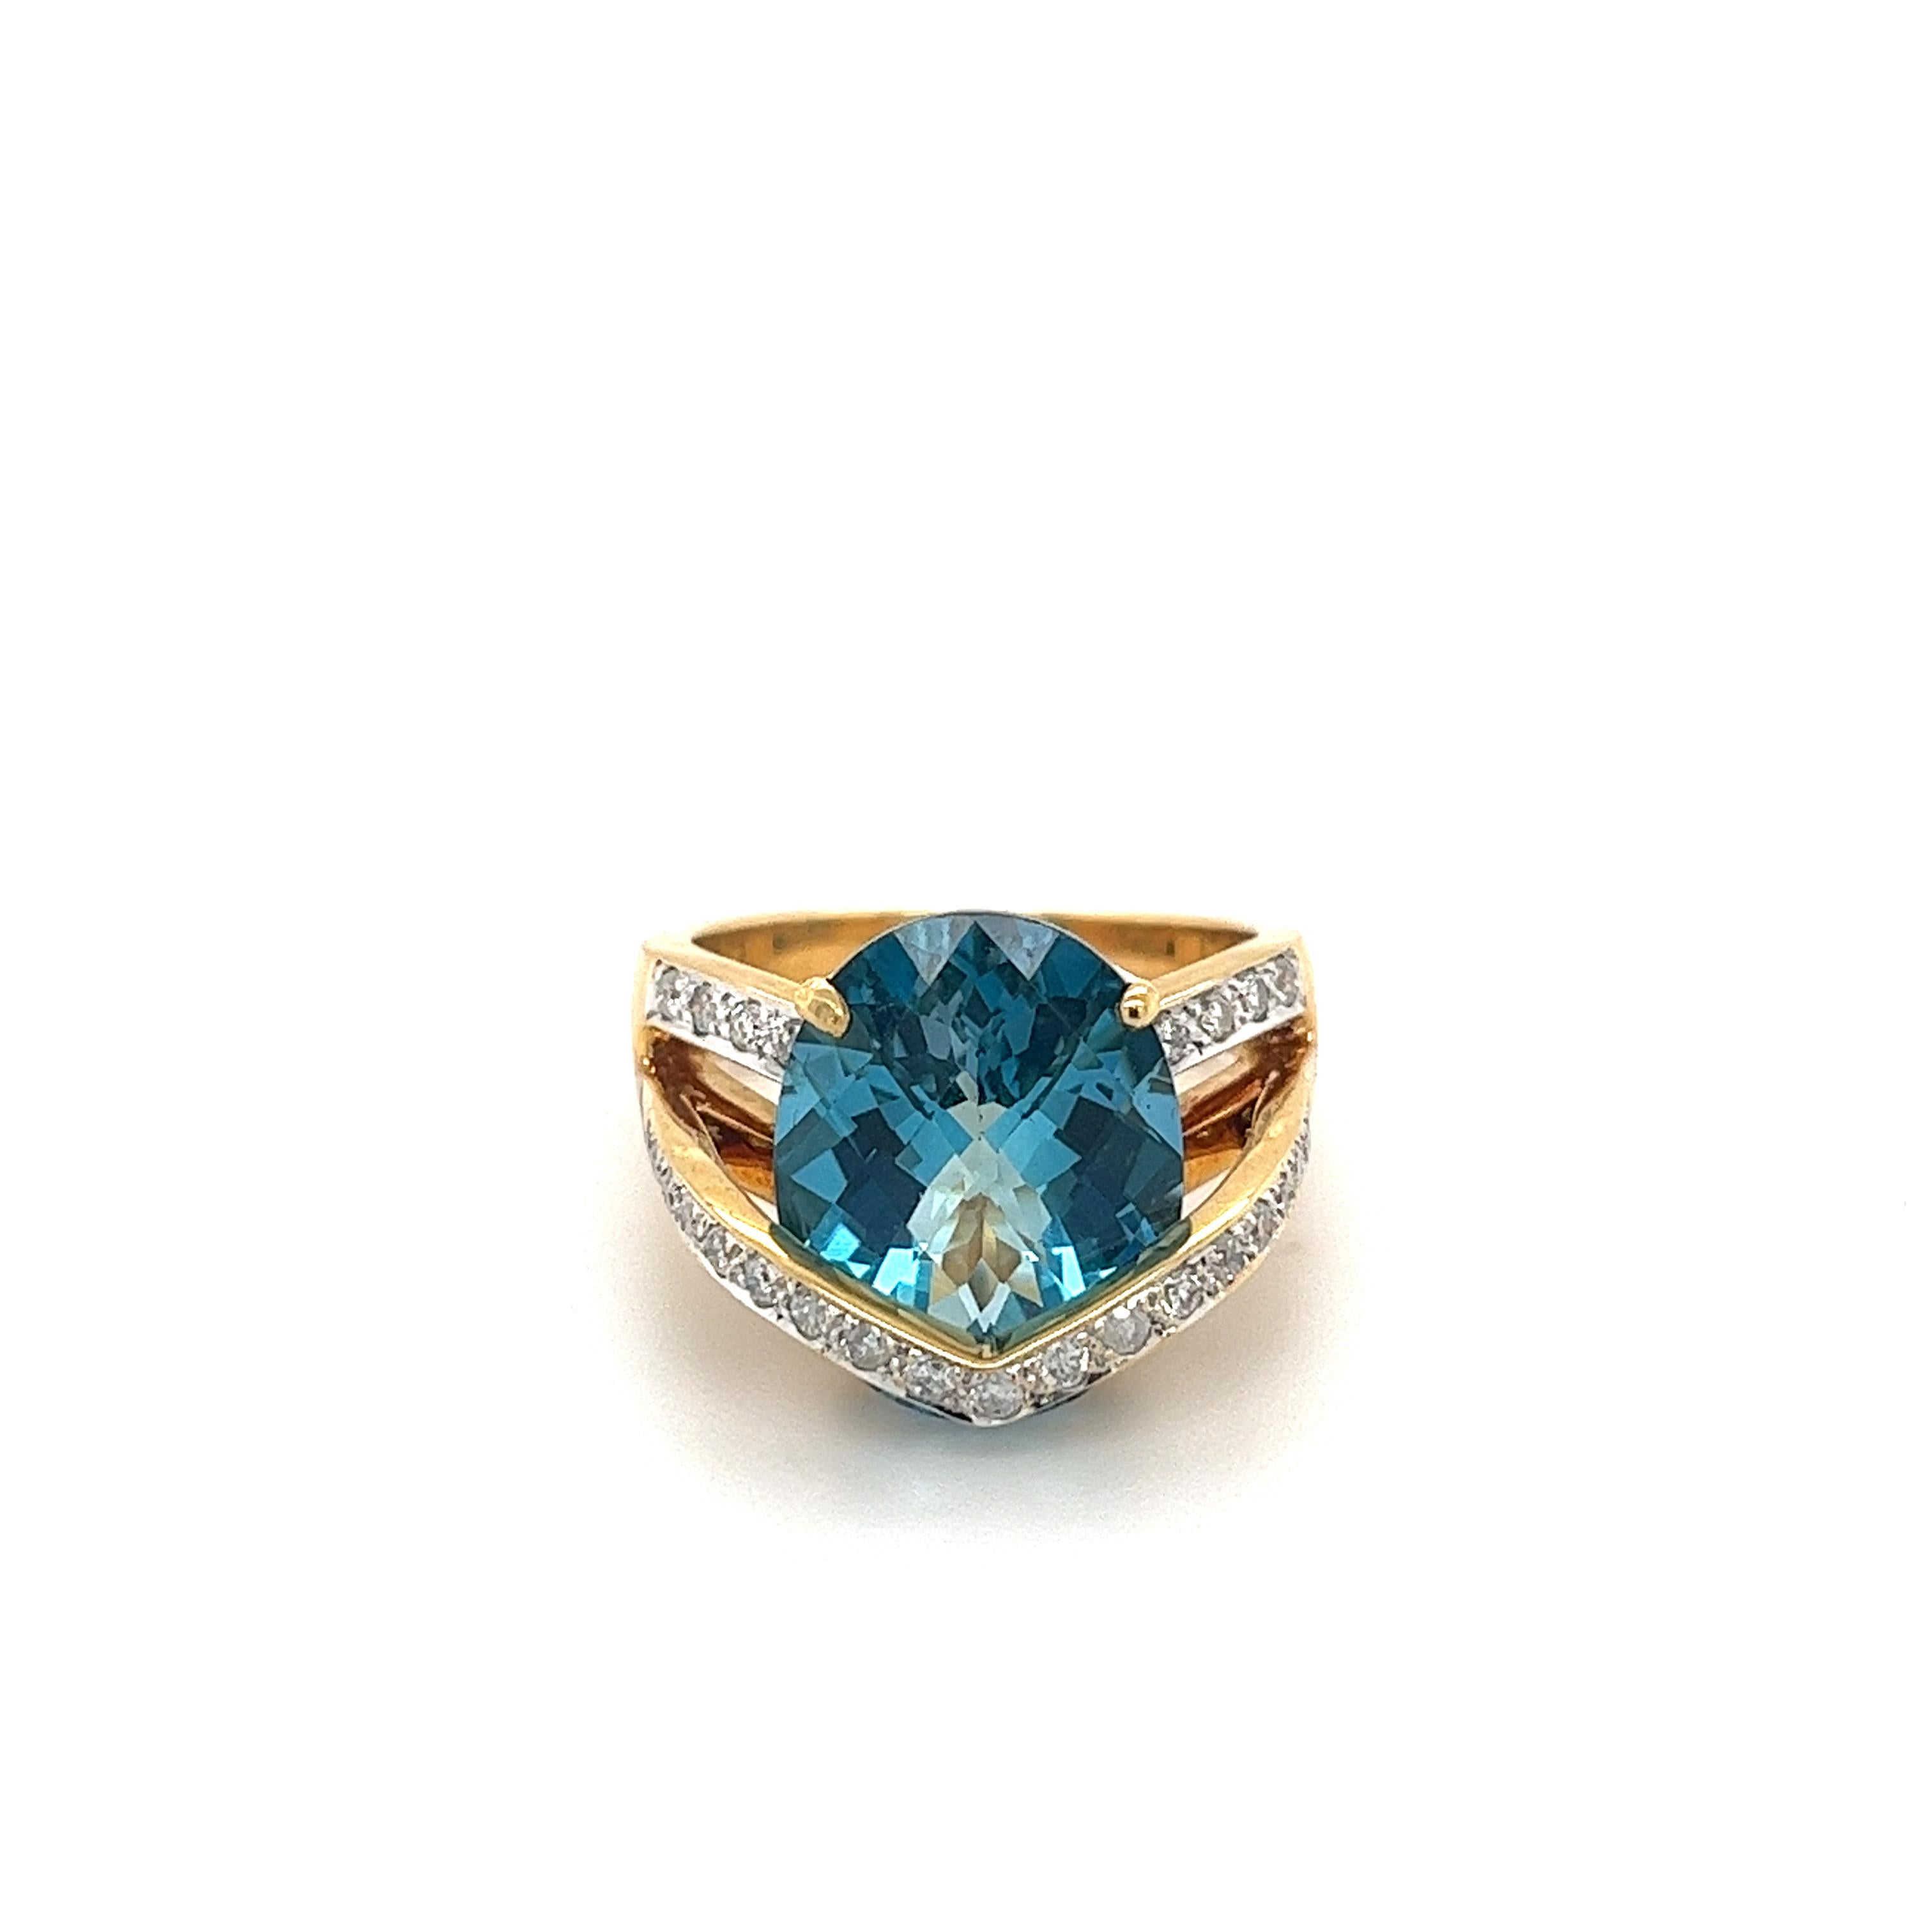 Vibrant and brilliant oval-cut Blue Topaz set in bypass overlap ring. Mounted in a 4-prong 18 karat yellow gold setting

✔ Topaz details: Blue topaz, oval-cut, 7.54 carat
✔ Ring Weight: 10.4 grams
✔ Ring Size: 7
✔ Diamond Details: 28 diamonds,